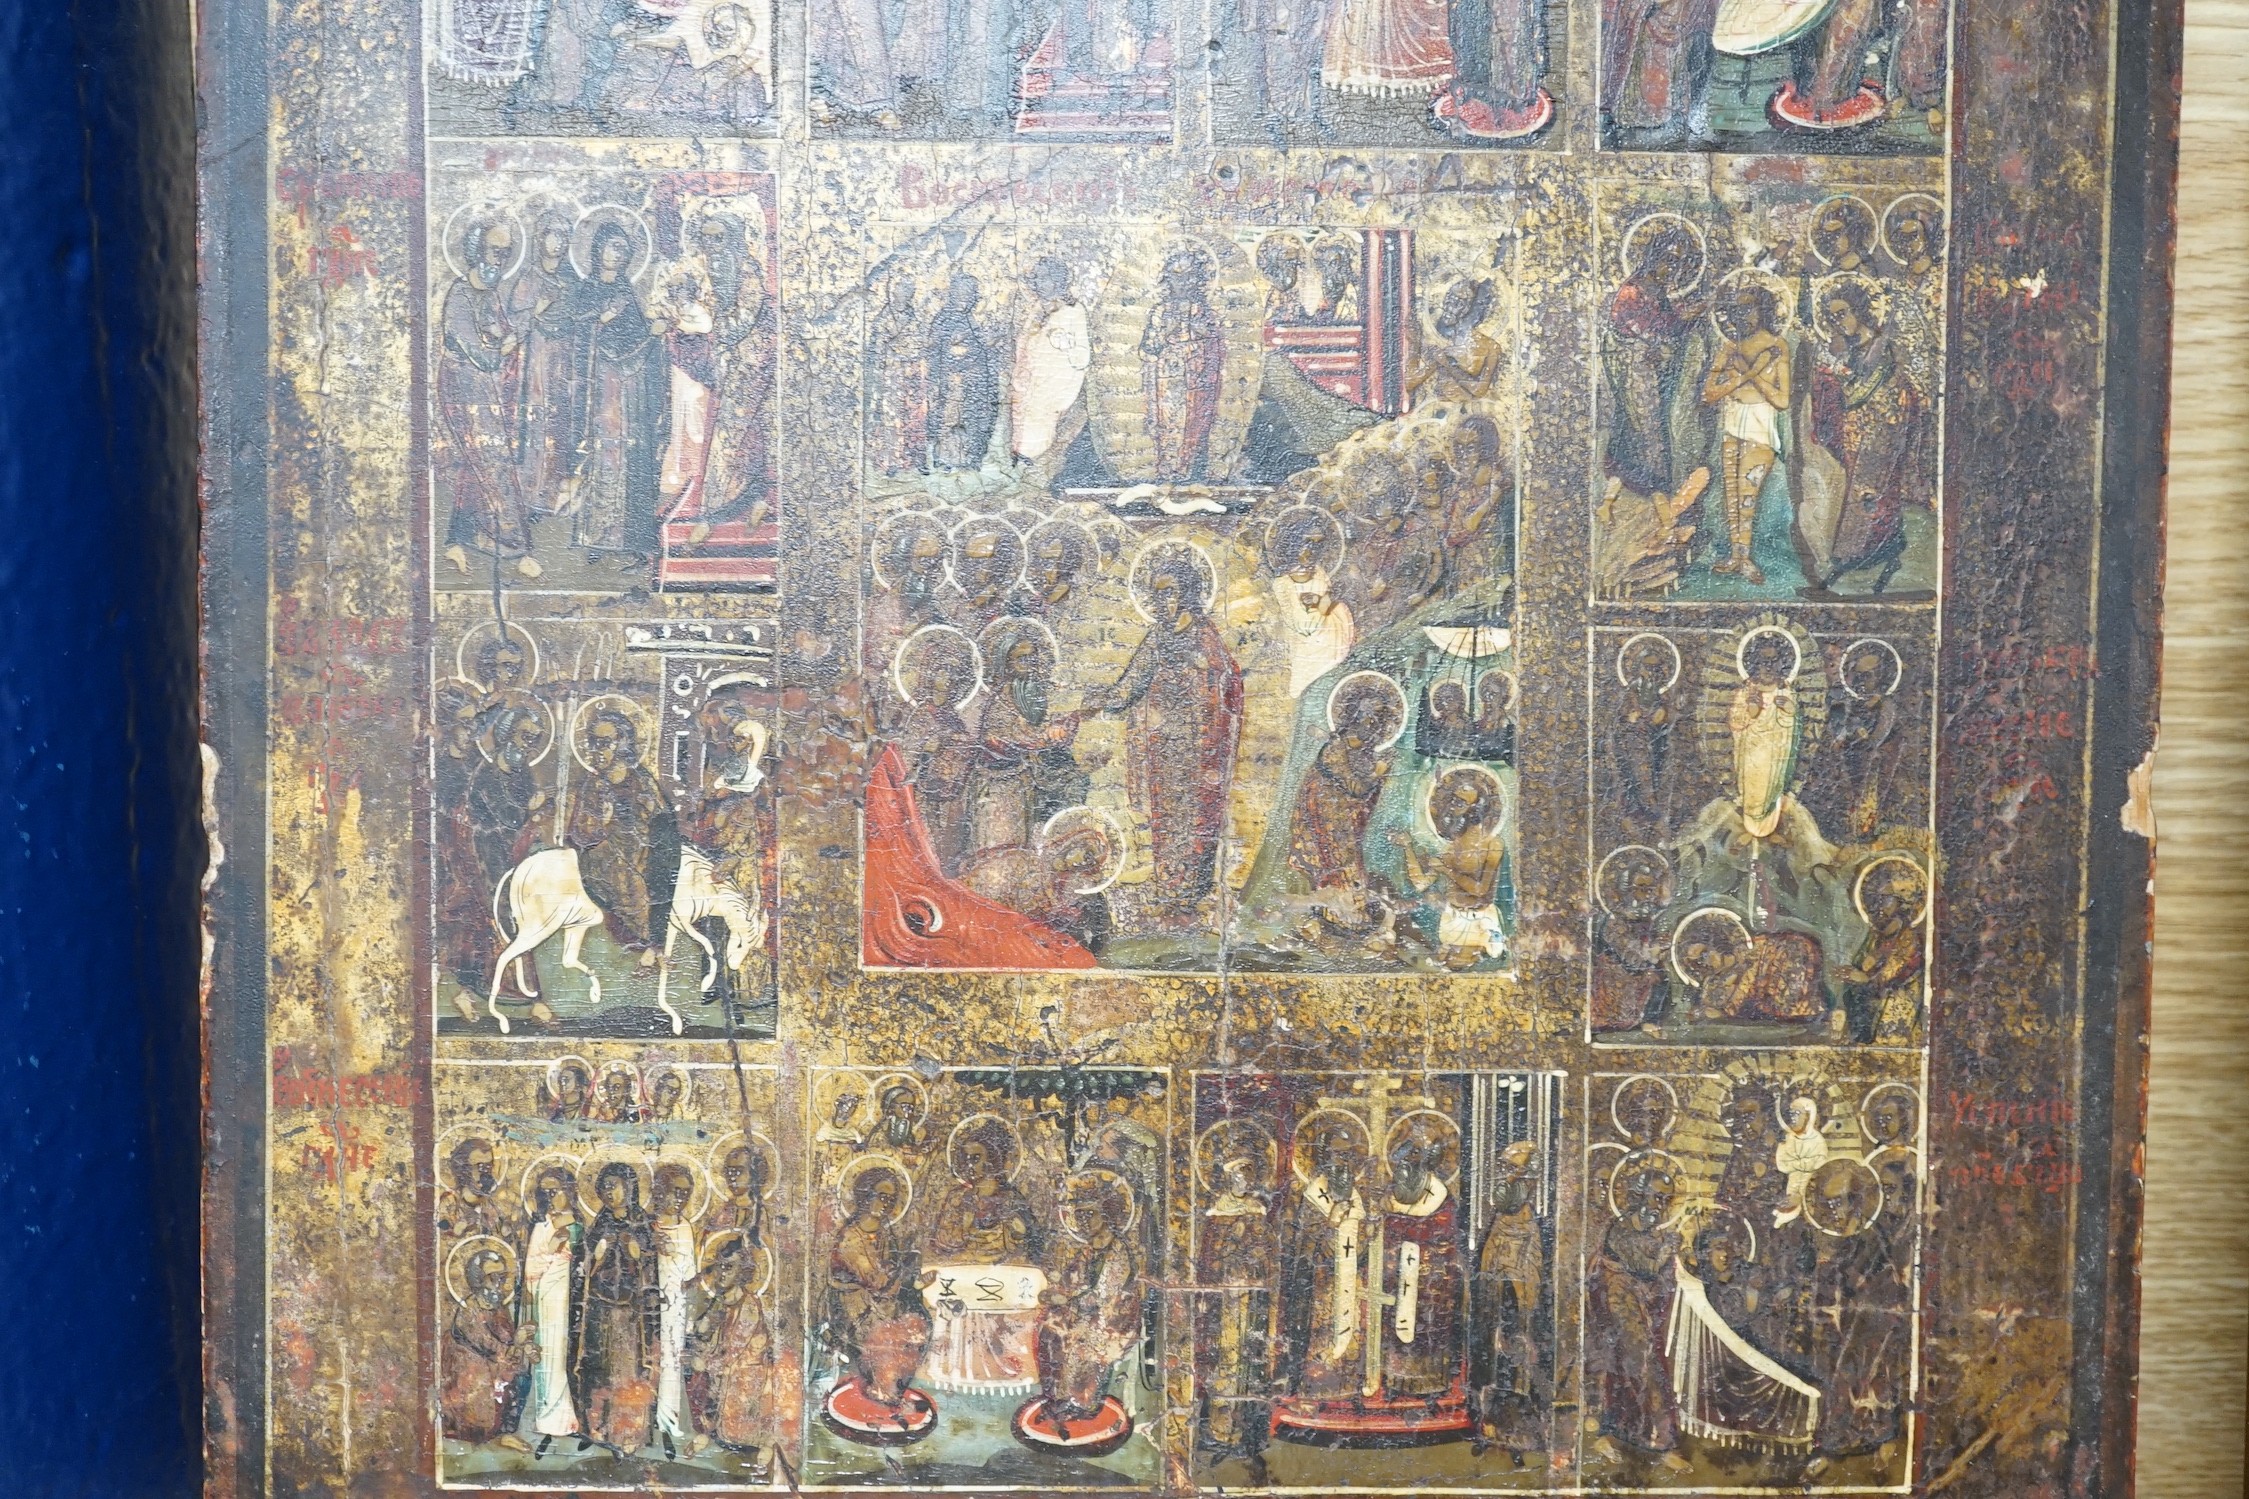 19th century Eastern European School, tempera on wooden panel, Icon with scenes from the Life of Christ, 35 x 30cm